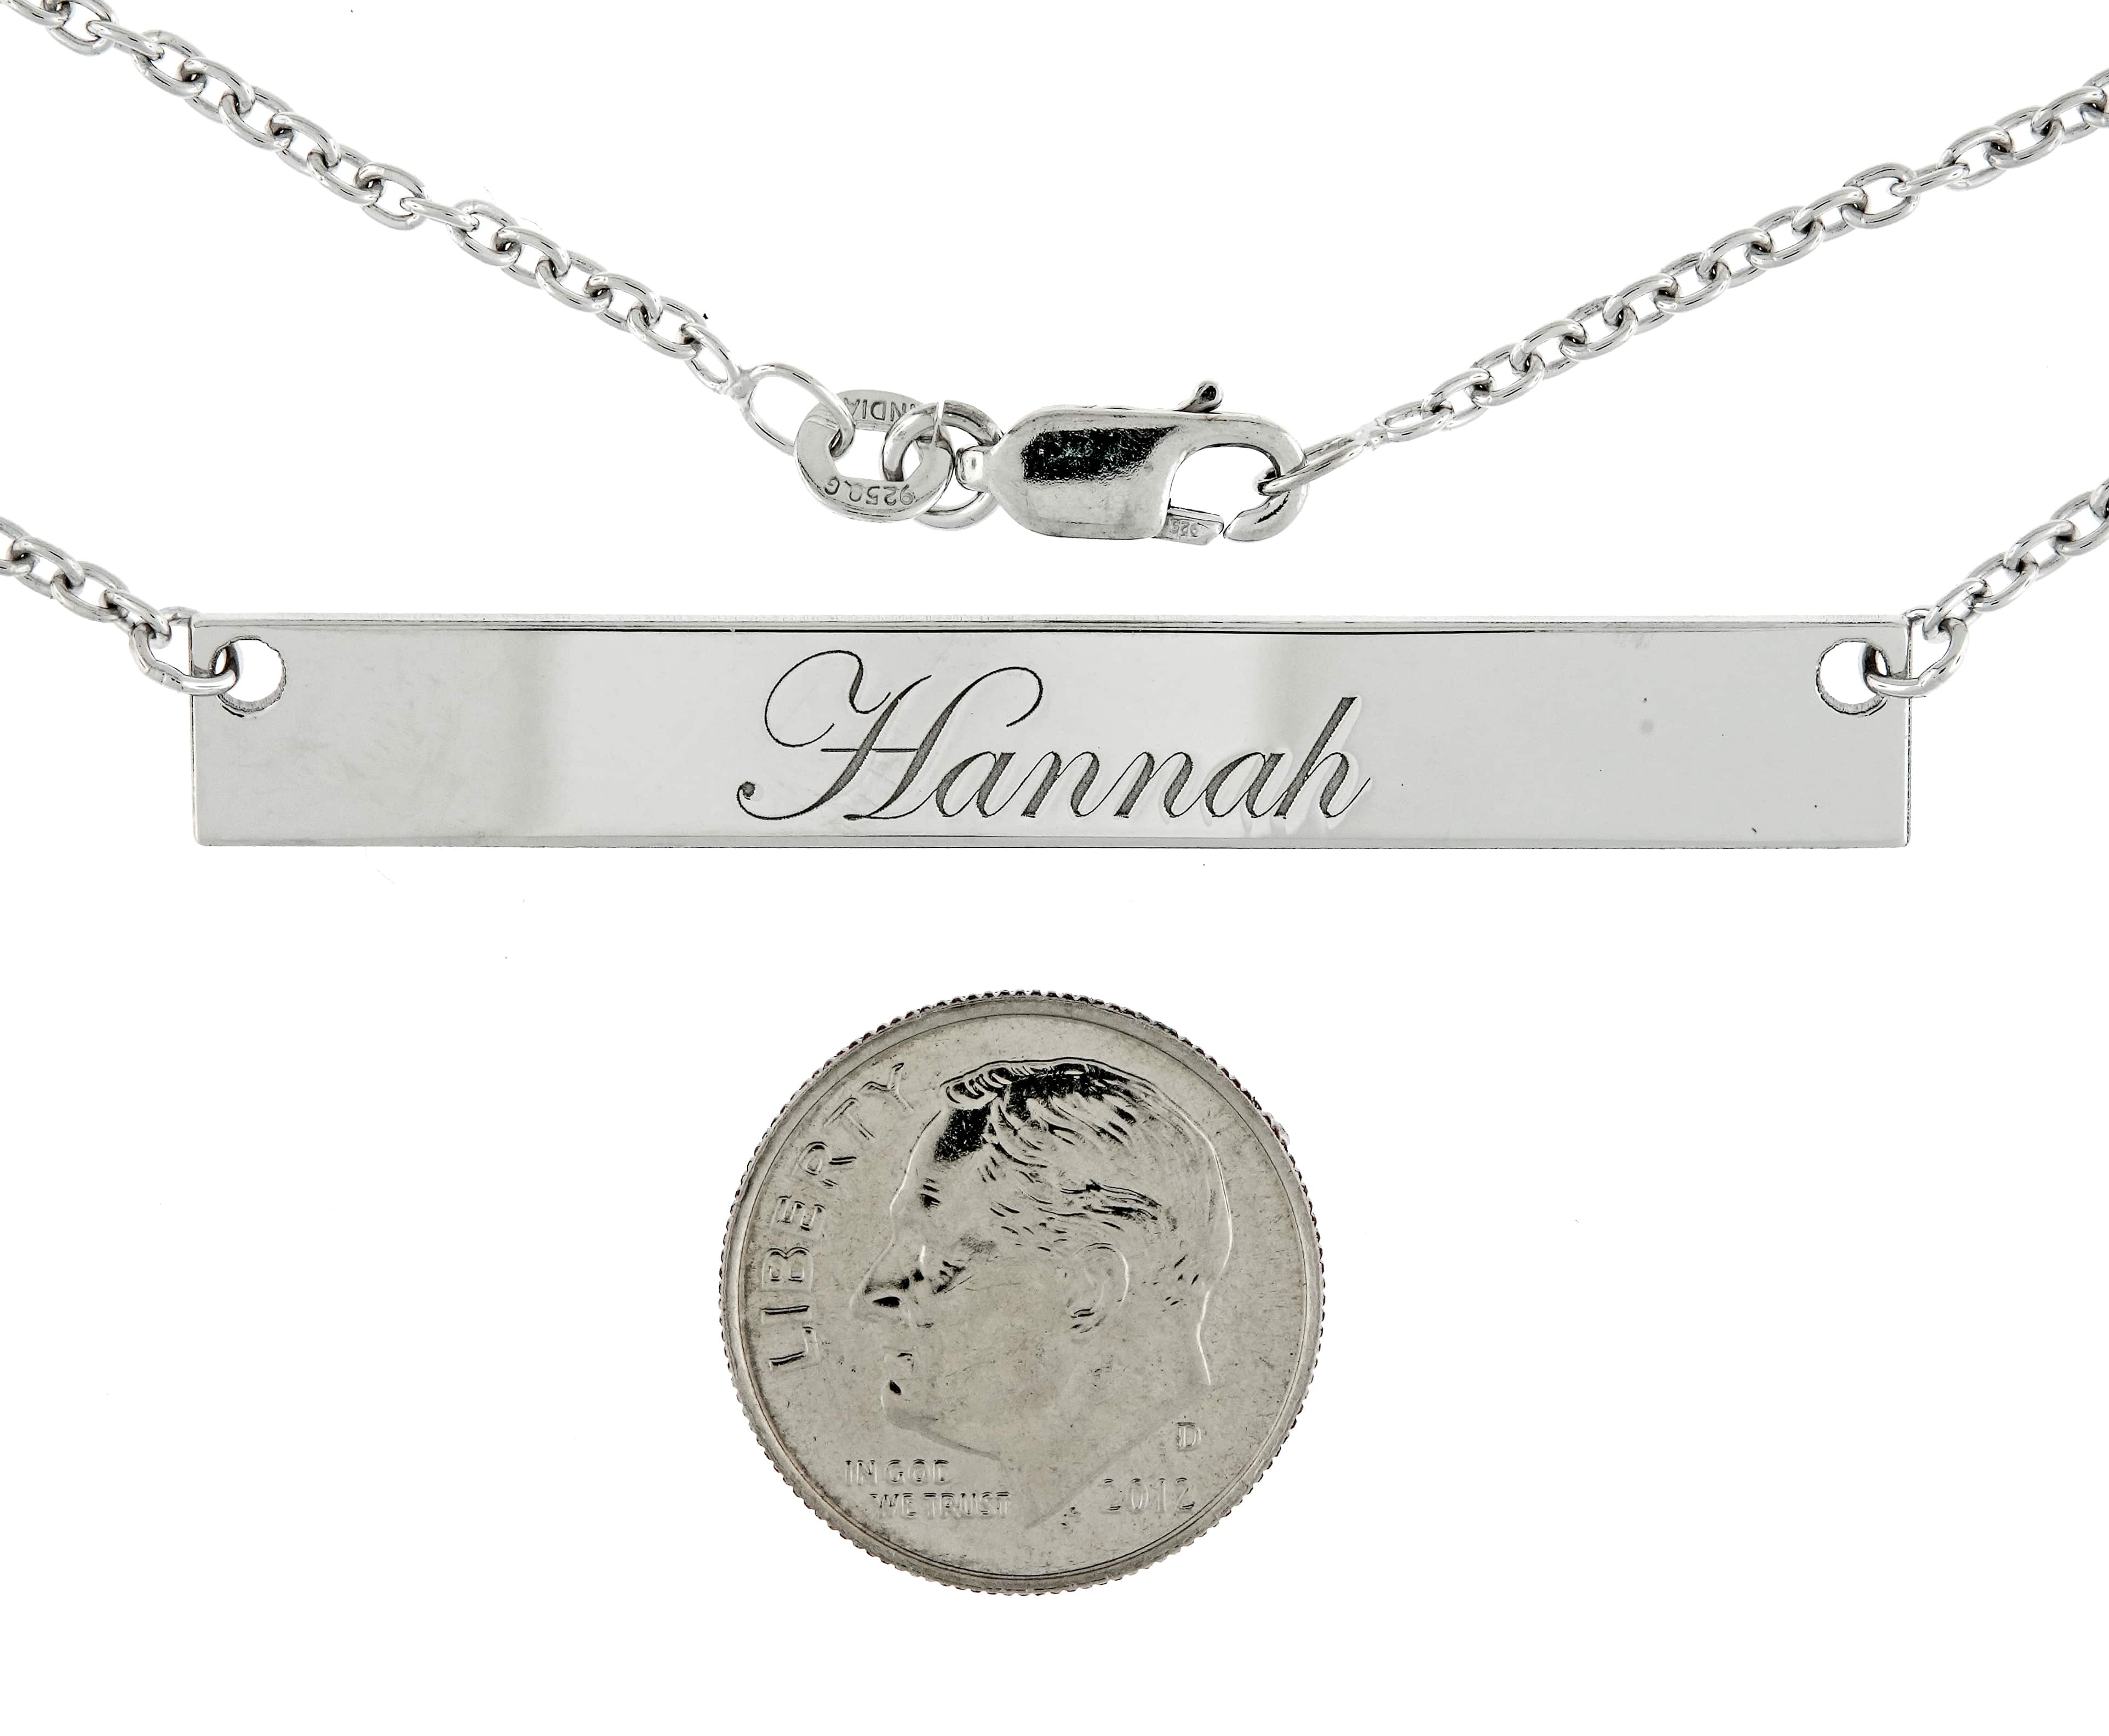 14k 10k Gold Sterling Silver Large Name Bar Nameplate Necklace Personalized